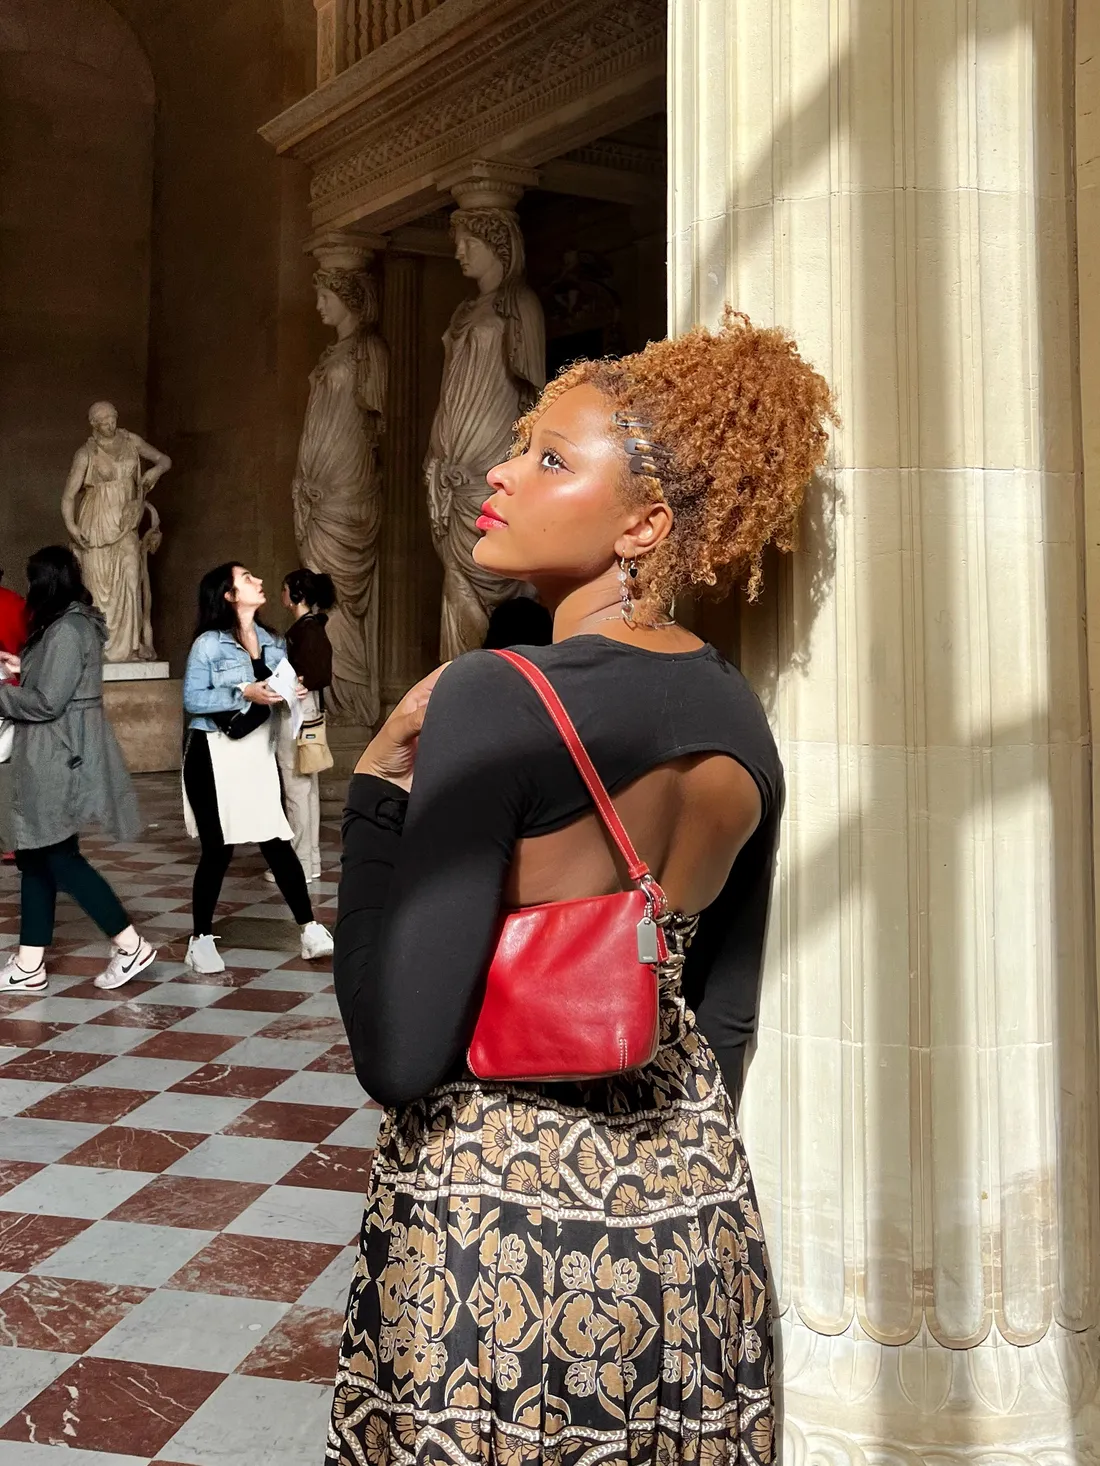 Mariya Dempsey at Louvre Museum in Paris, while studying abroad.